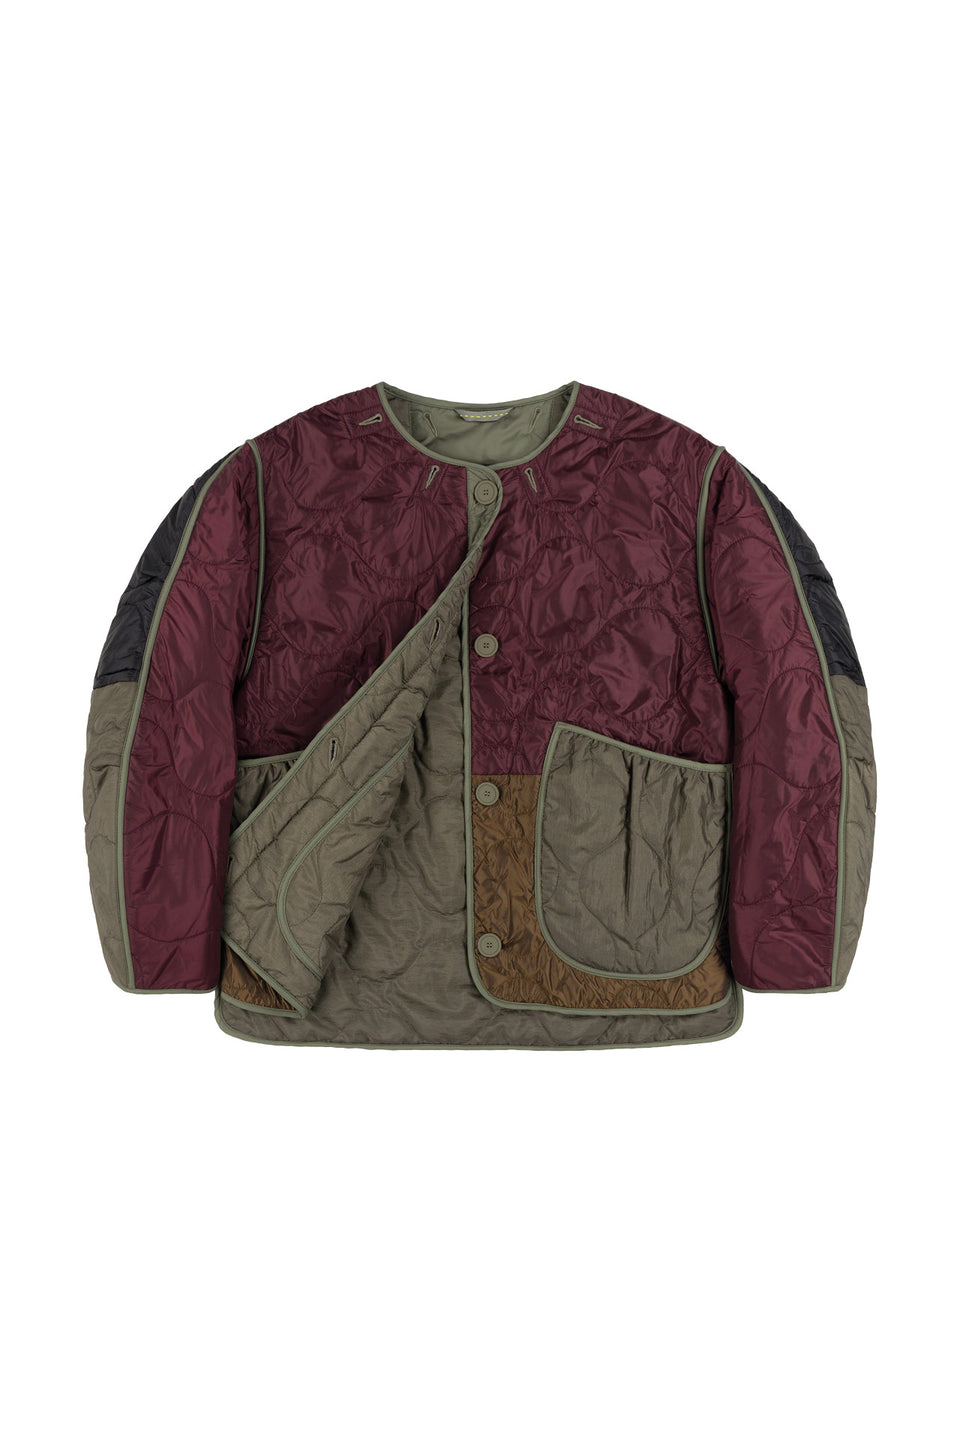 Patchwork Quilt Jacket - Wine / Dark Olive (listing page thumbnail)